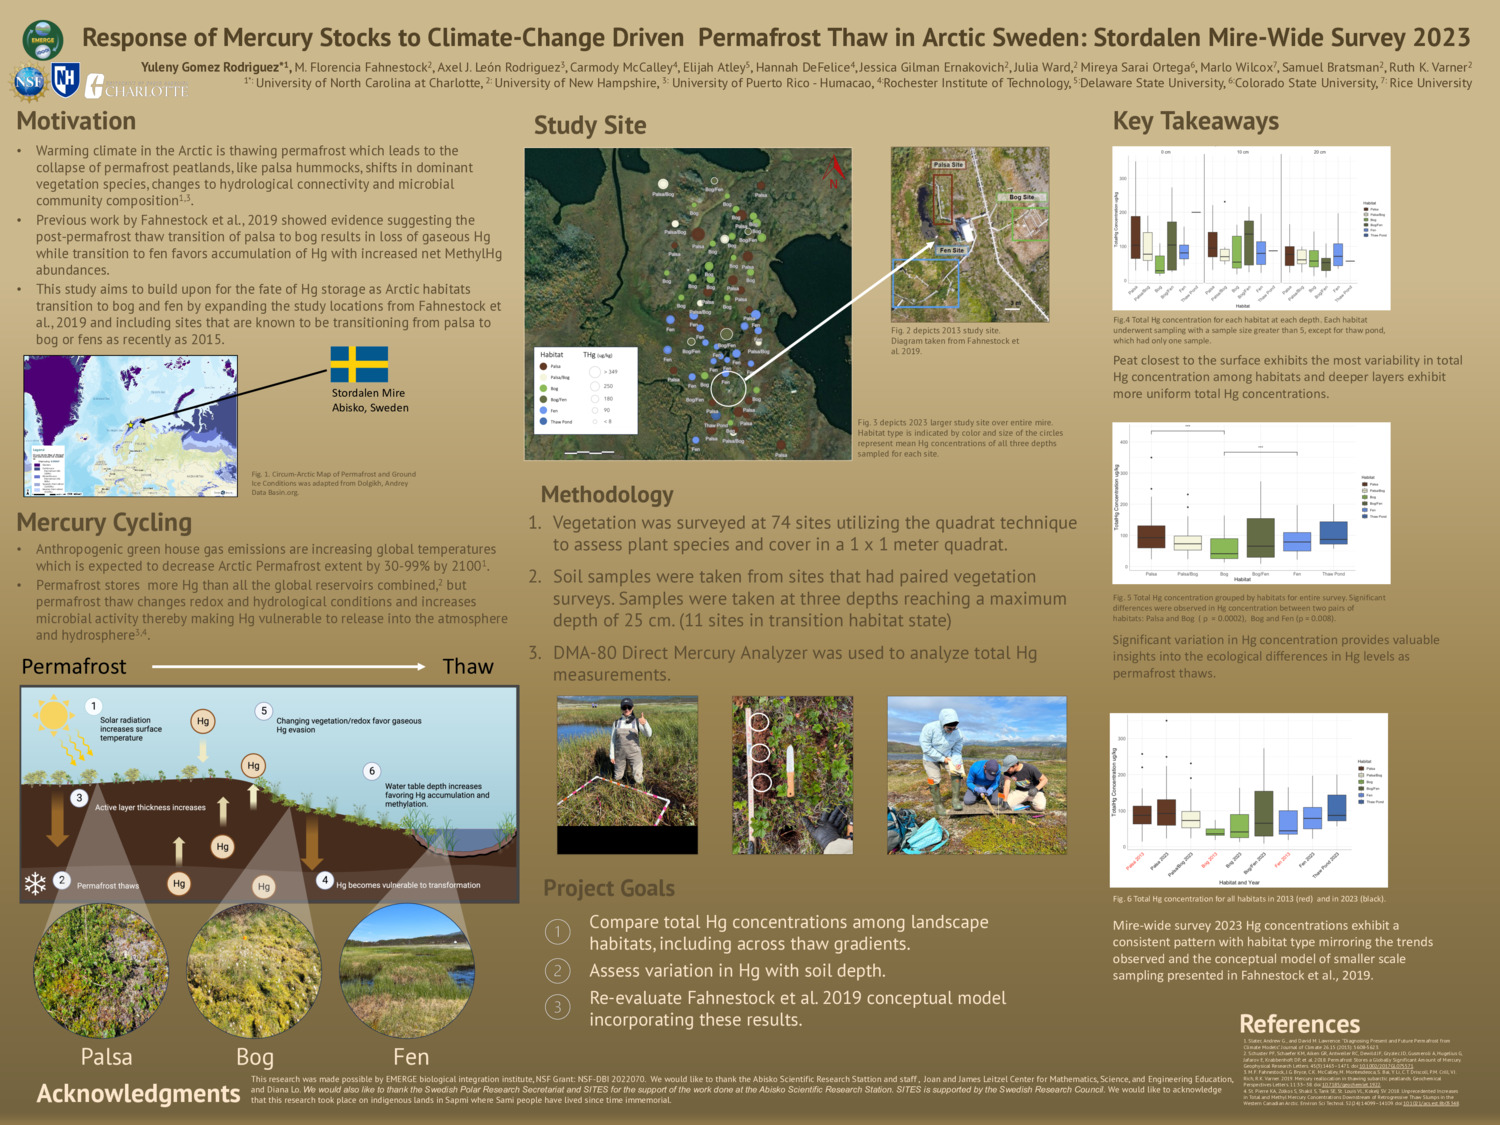 Response Of Mercury Stocks To Climate-Change Driven Permafrost Thaw In Arctic Sweden: Stordalen Mire-Wide Survey 2023 by mfmprado